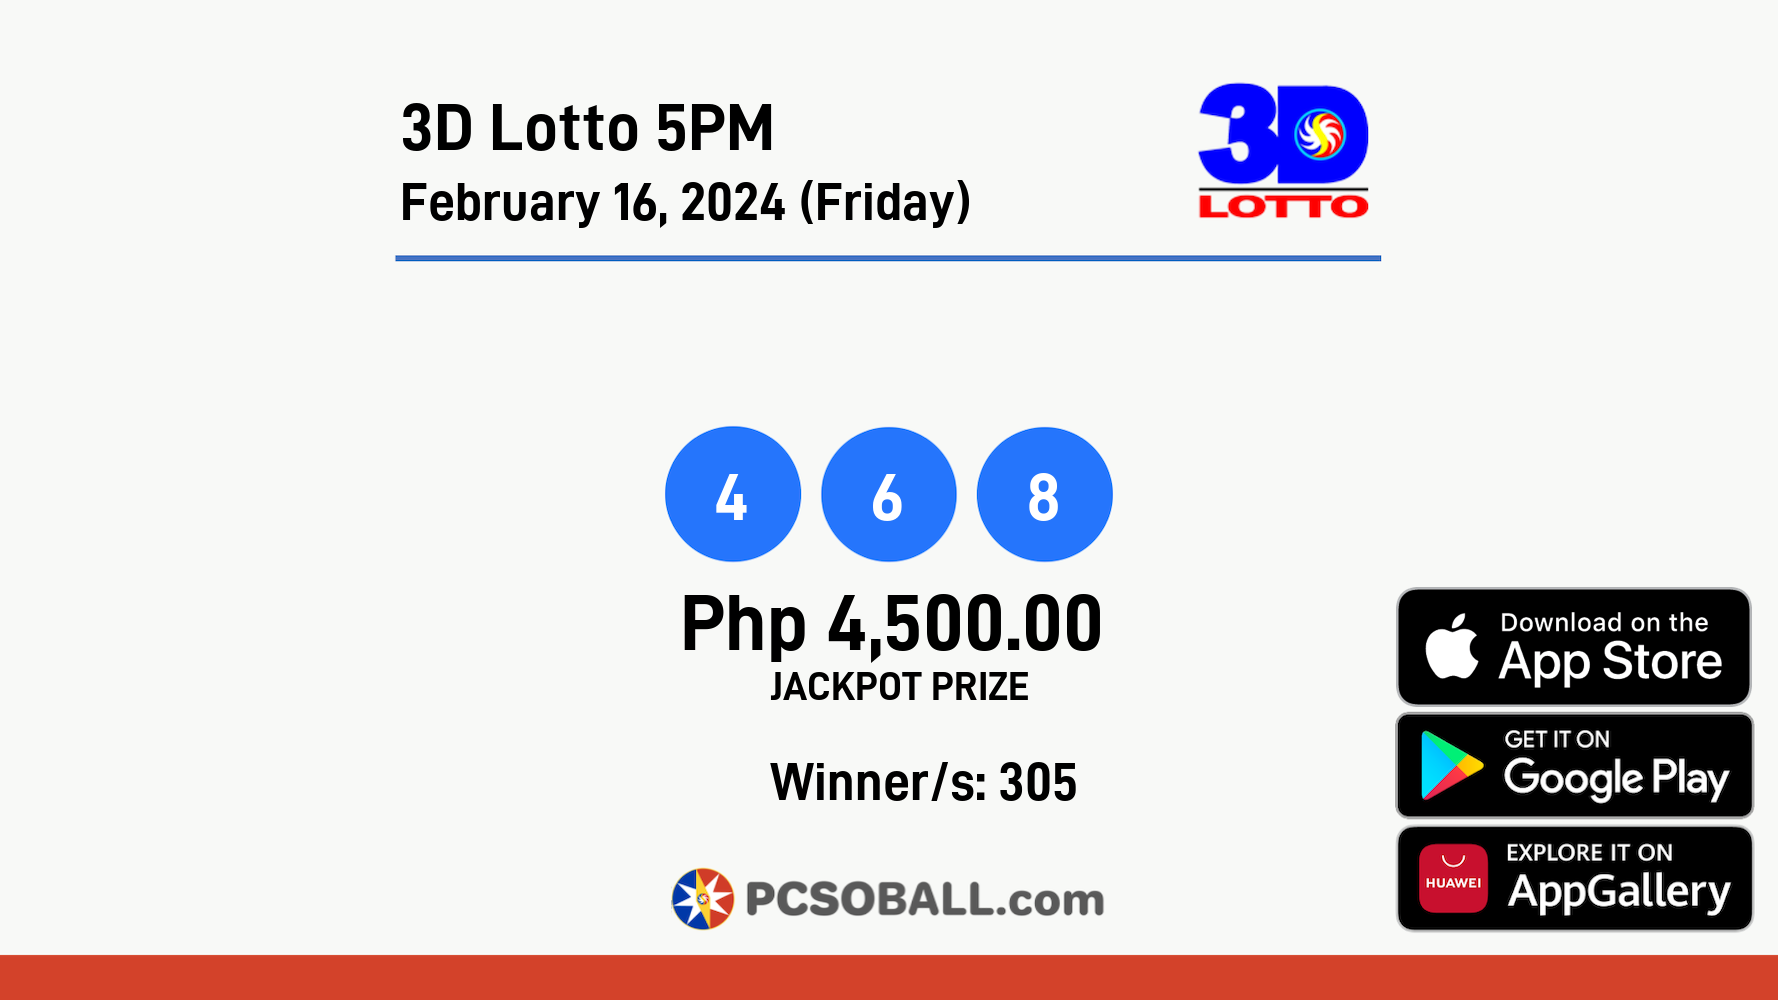 3D Lotto 5PM February 16, 2024 (Friday) Result